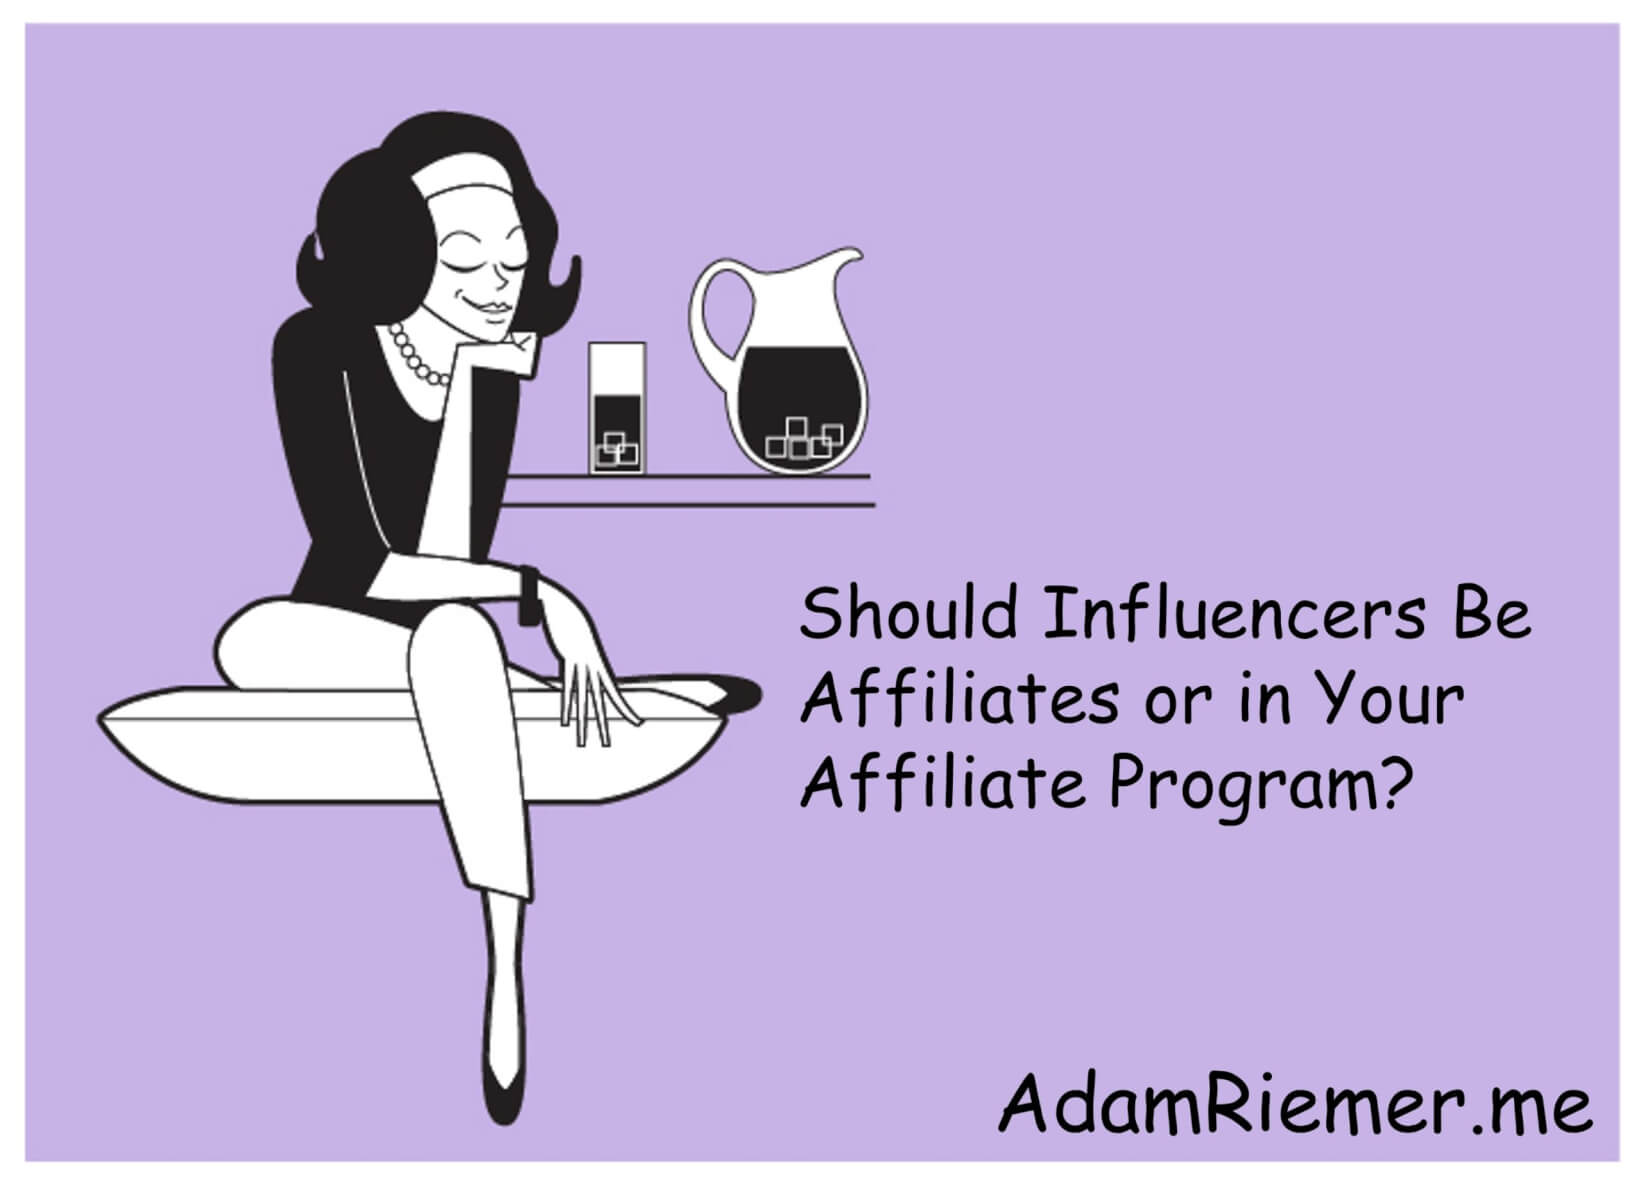 Should Influencers Be Affiliates or in Your Affiliate Program?